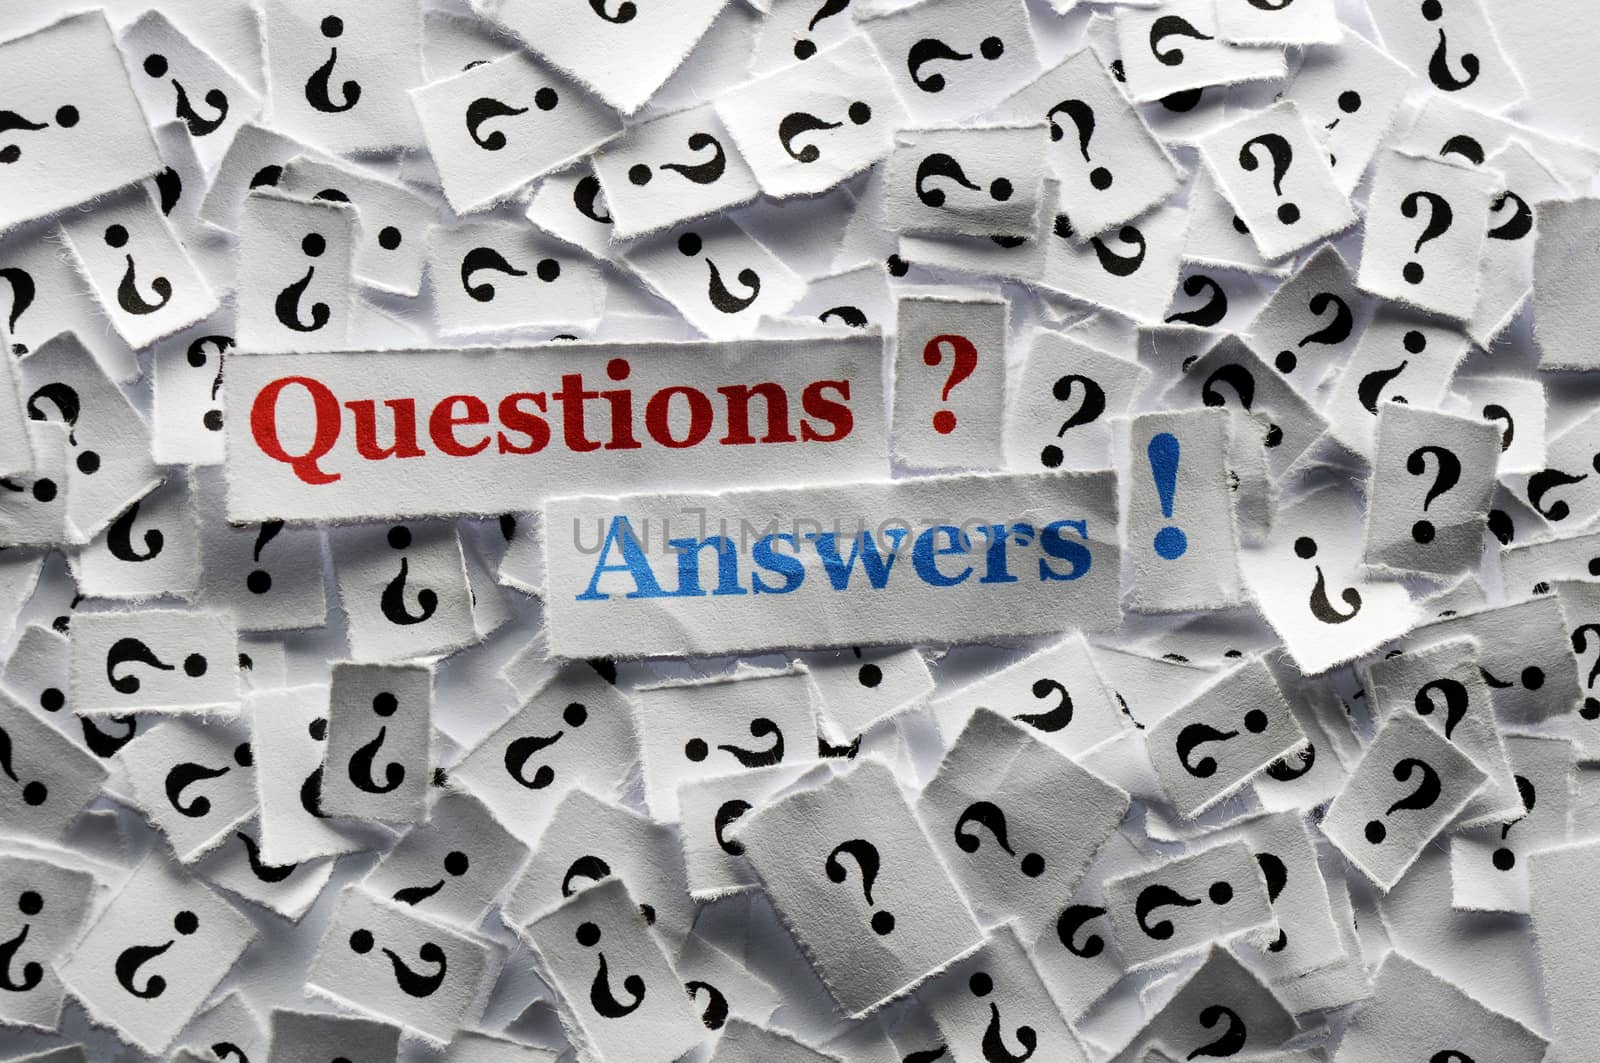 questions and answers  on white papers -hard light